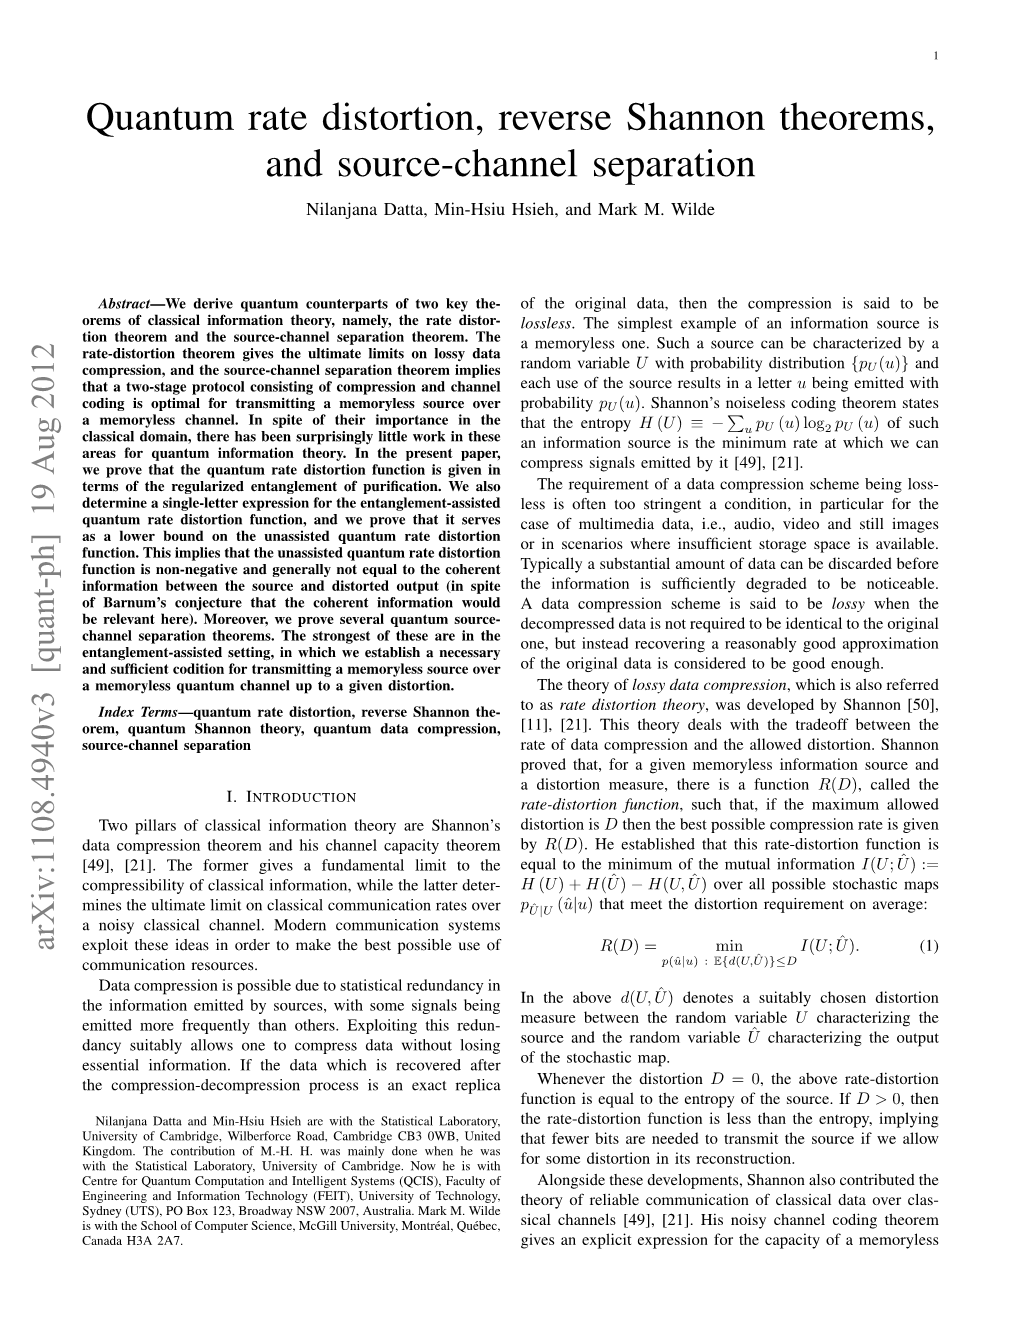 Quantum Rate Distortion, Reverse Shannon Theorems, and Source-Channel Separation Nilanjana Datta, Min-Hsiu Hsieh, and Mark M